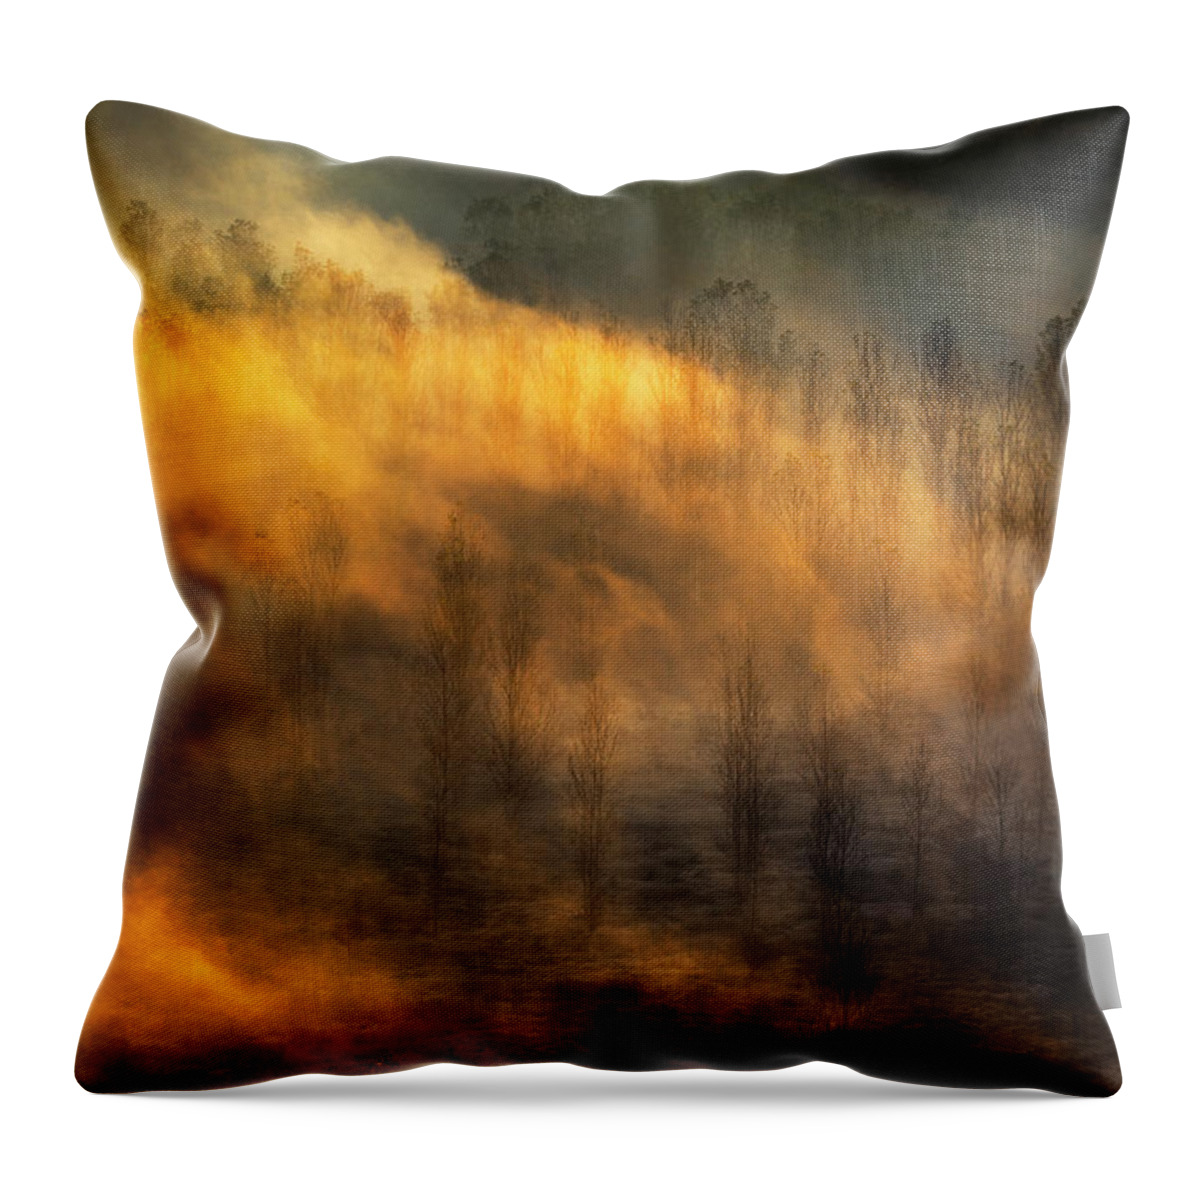 Bulgaria Throw Pillow featuring the photograph Thin Forest by Evgeni Dinev